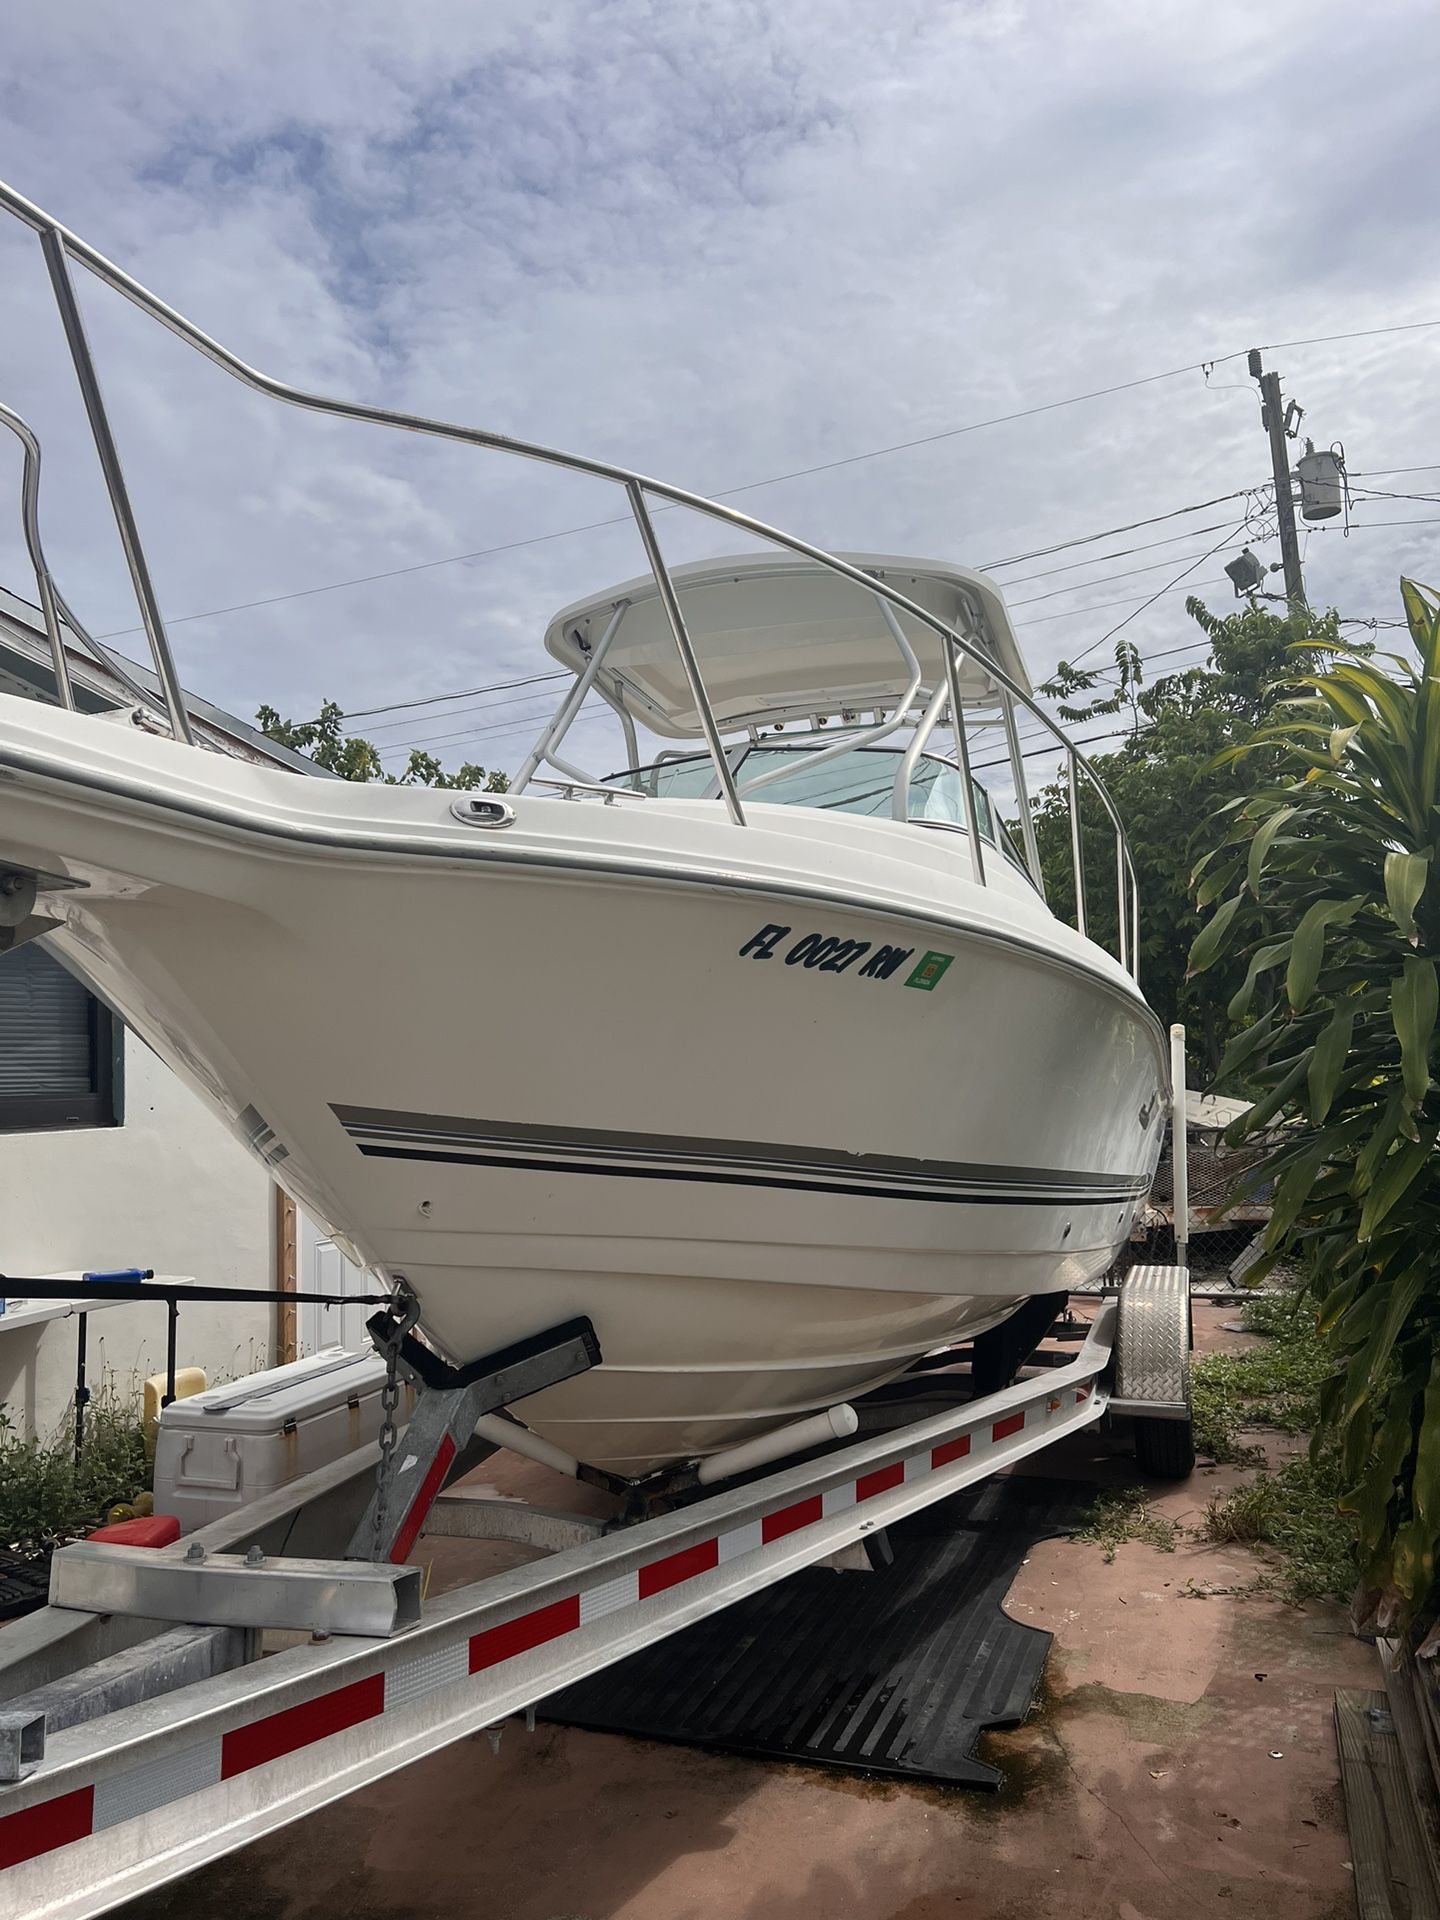 24 Ft Boat For Sale